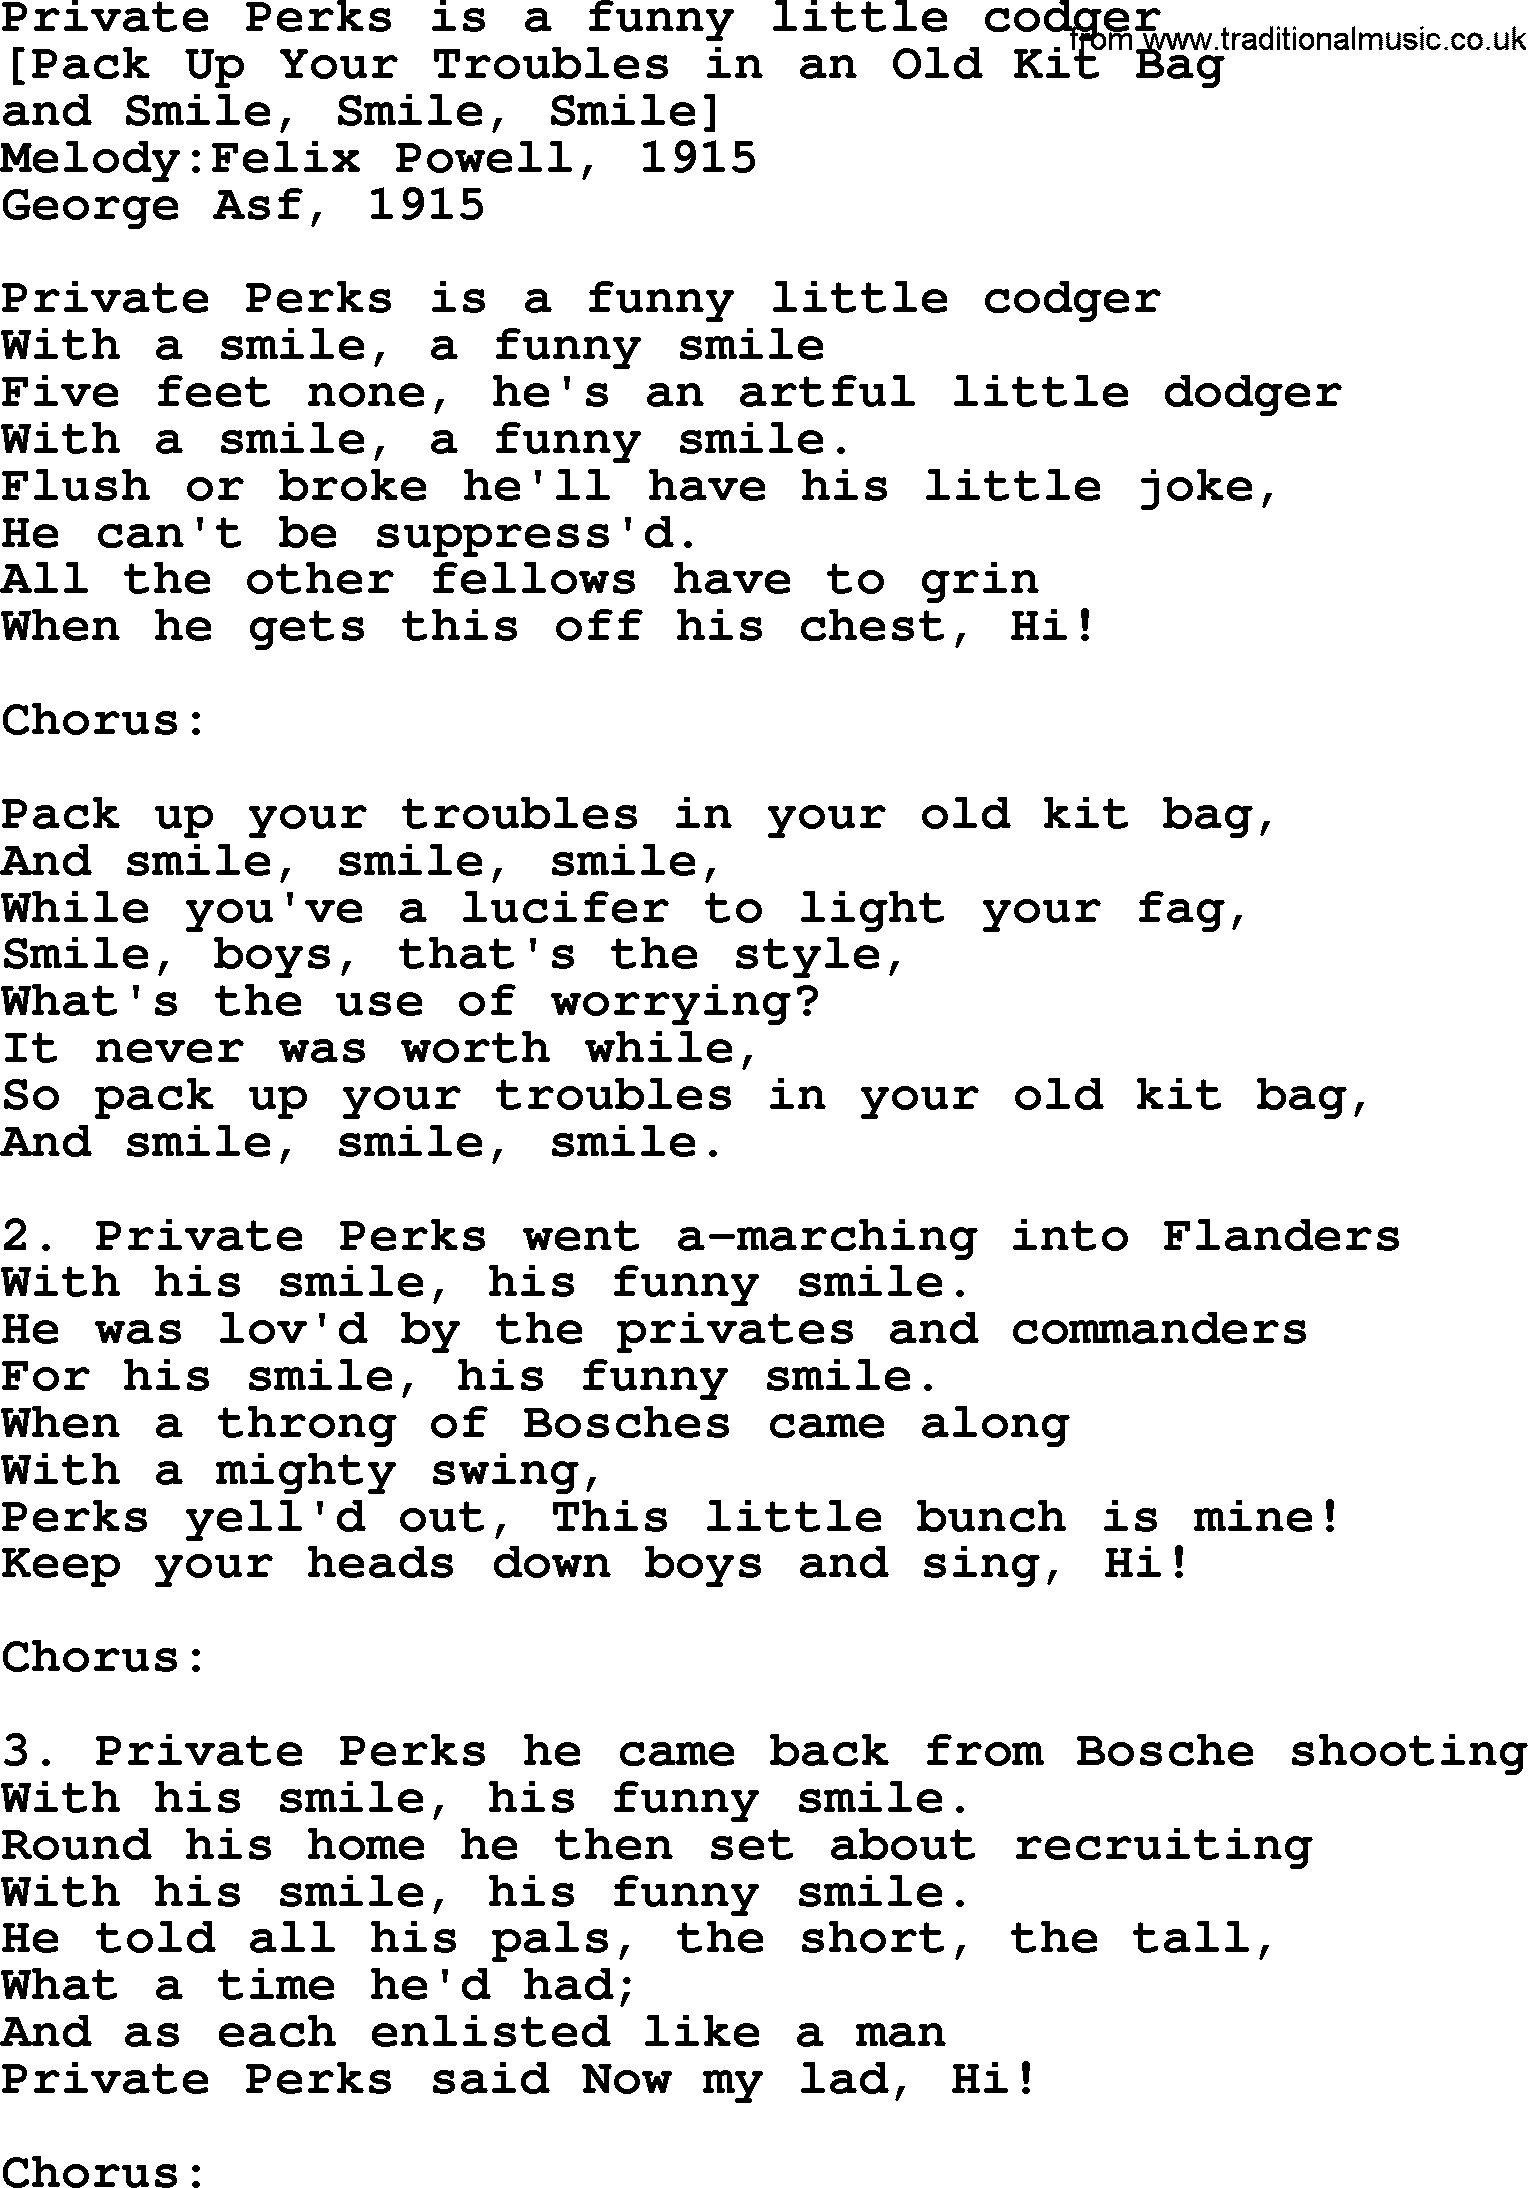 Old American Song: Private Perks Is A Funny Little Codger, lyrics